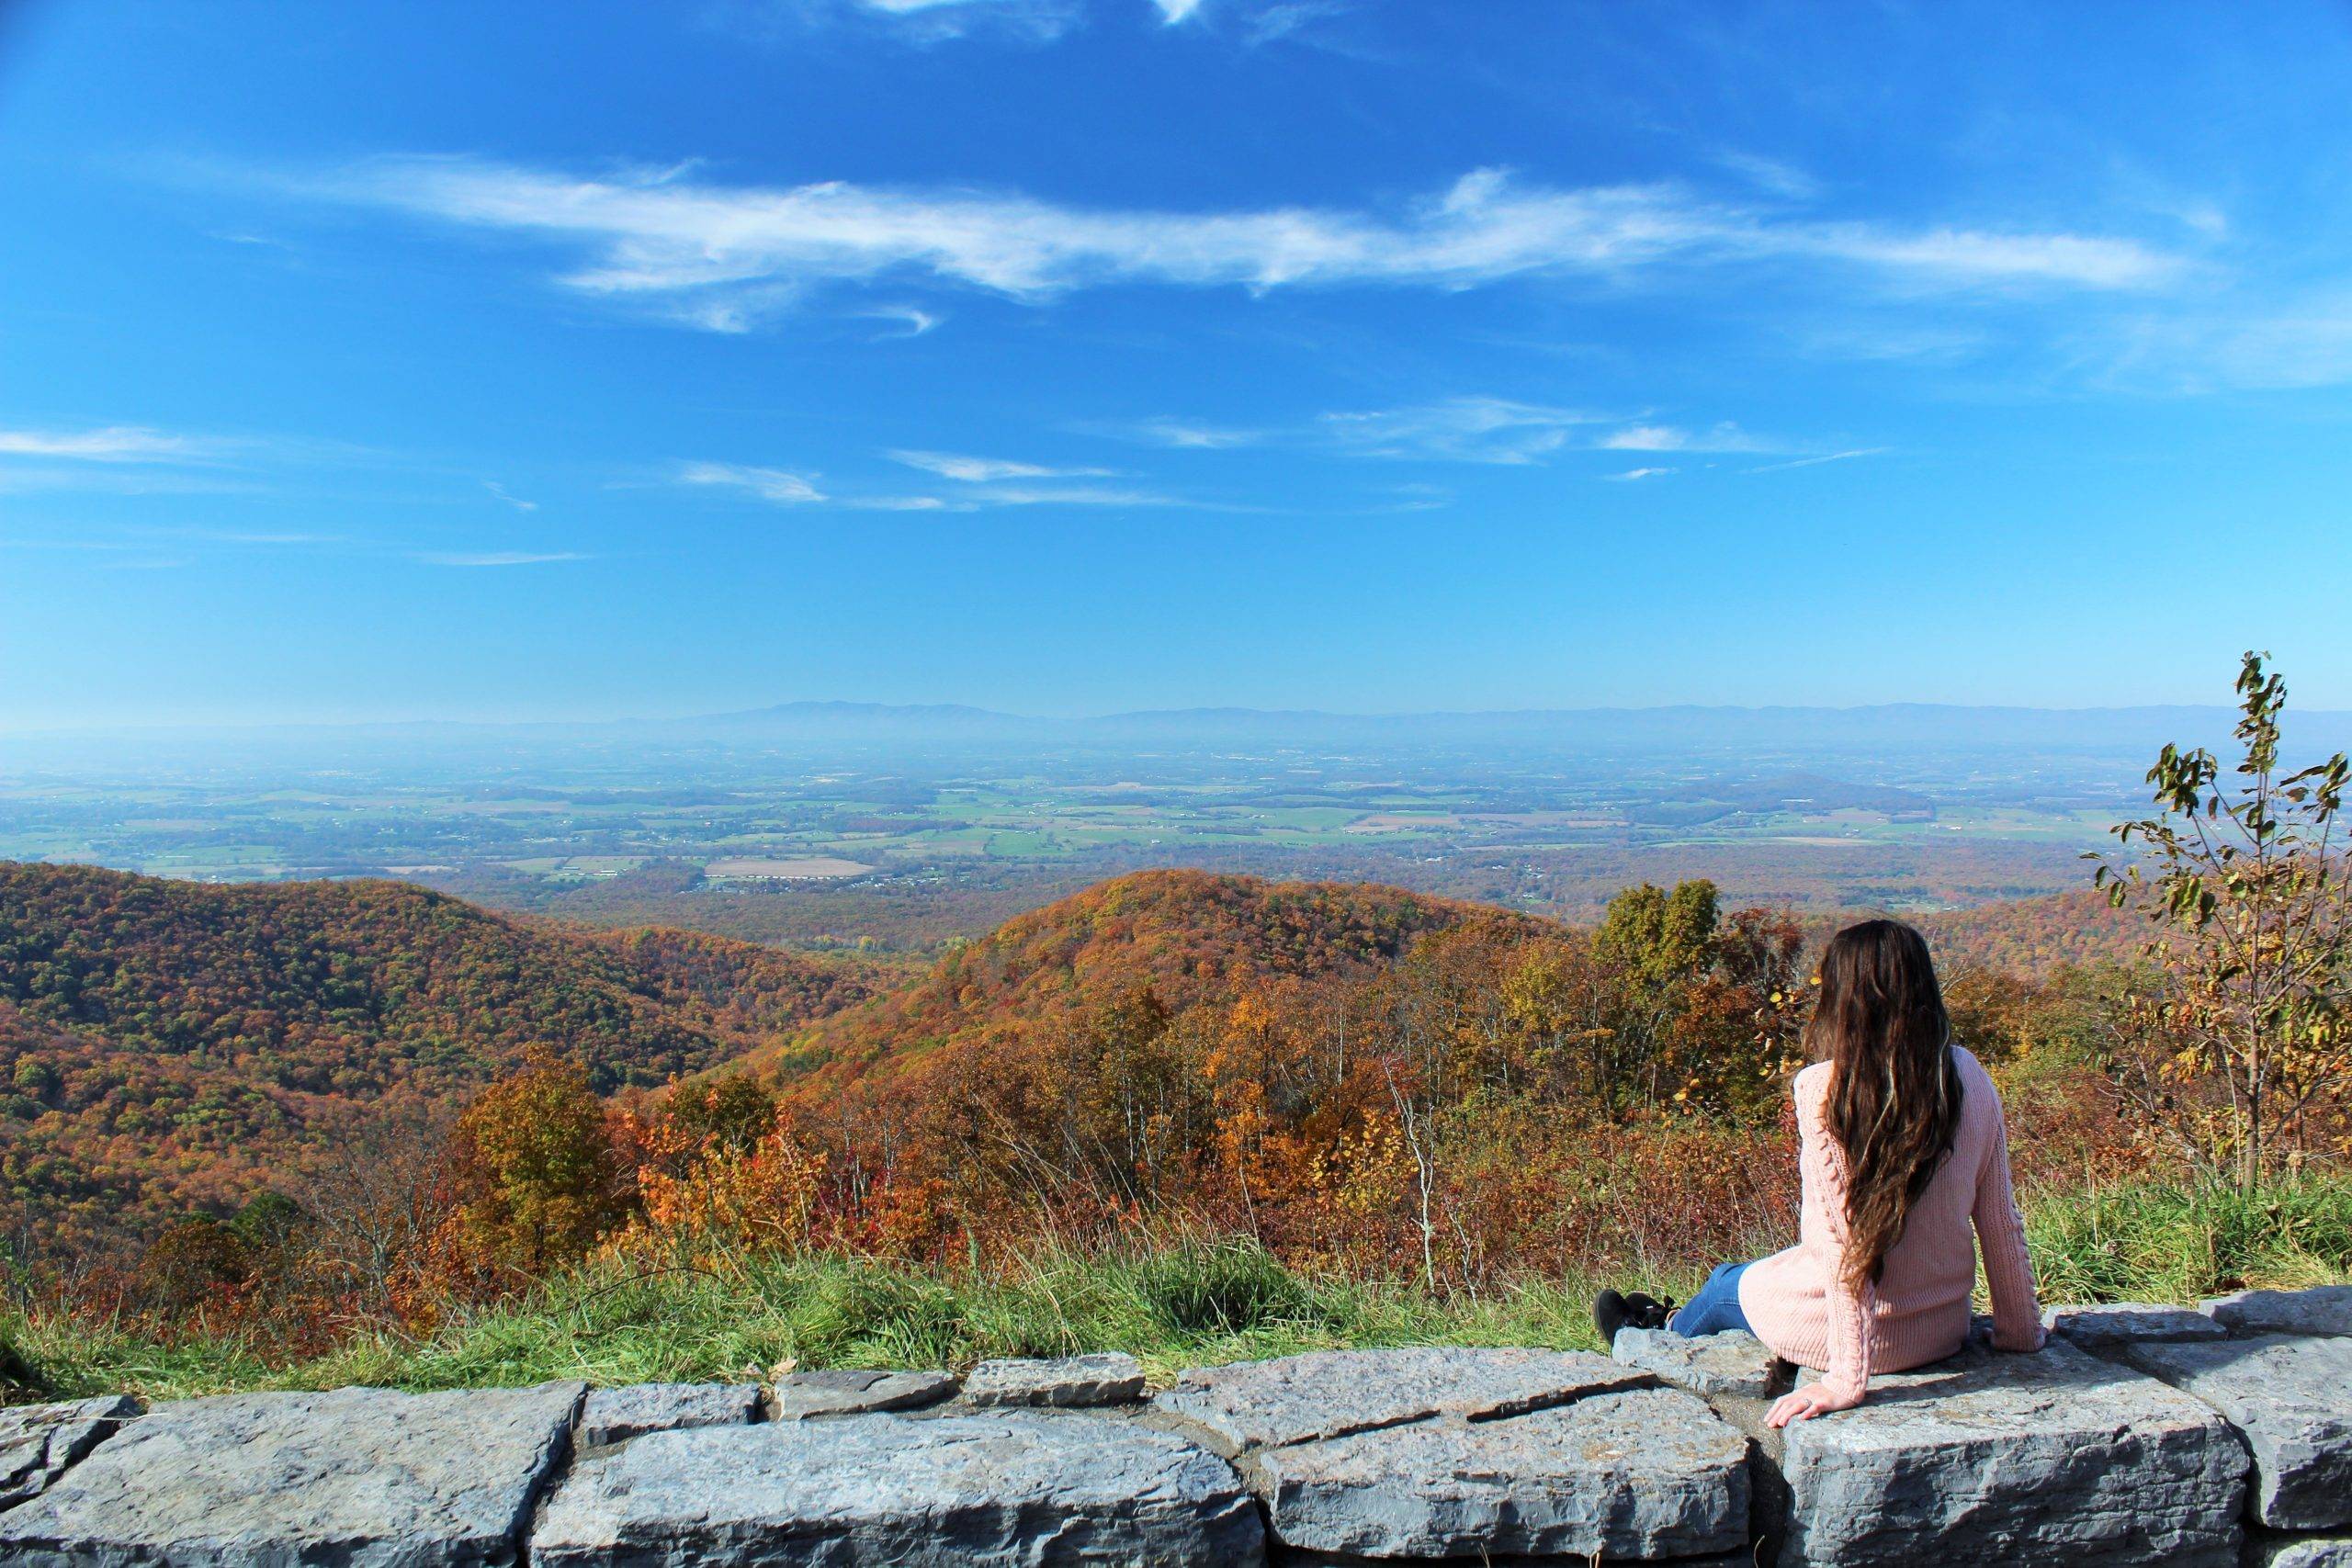 Girl in a pink sweater sitting on a low stone wall with colorful mountains and valleys in the background